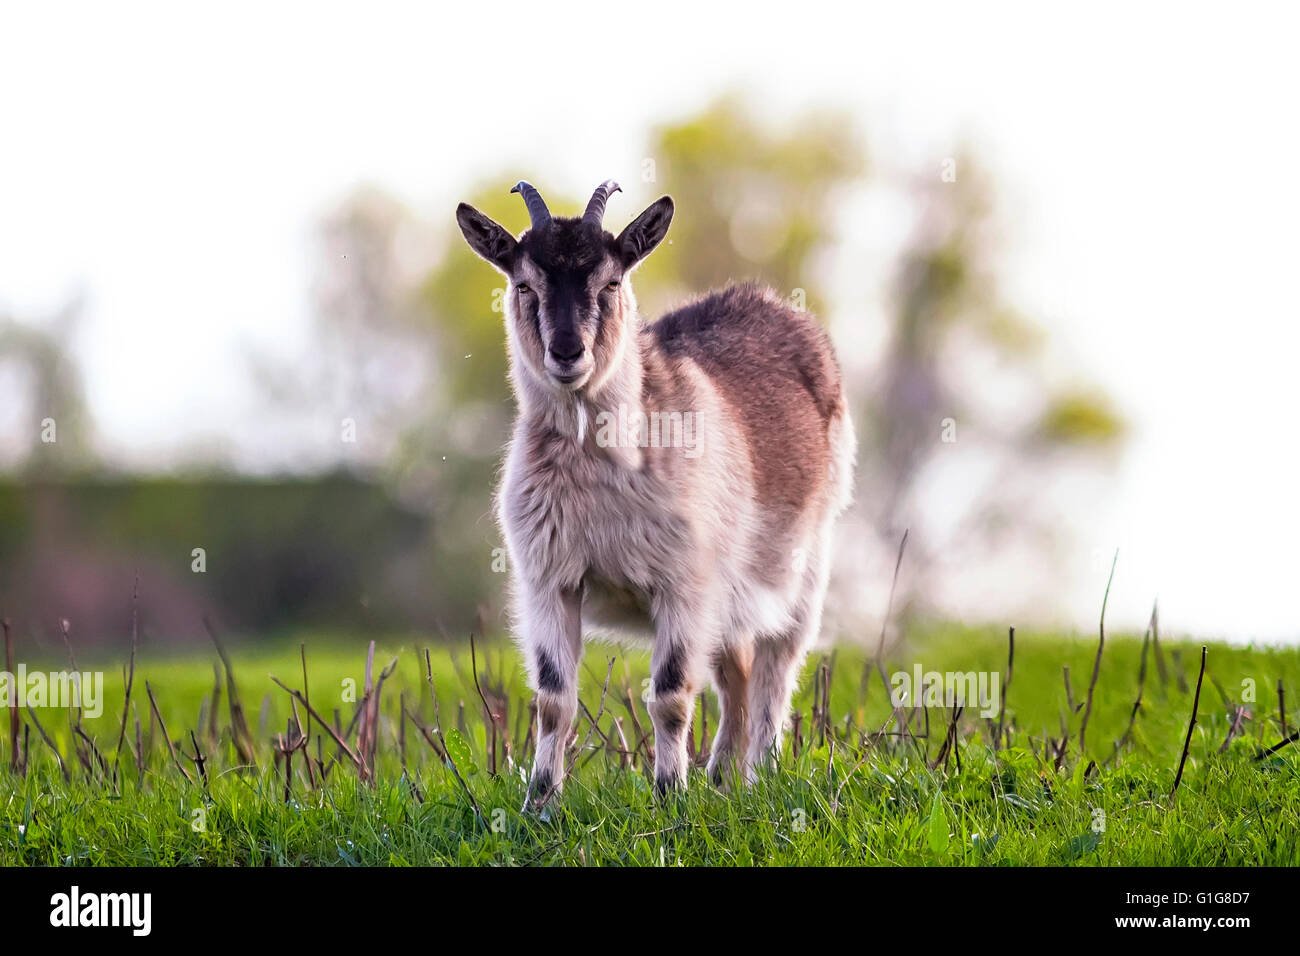 goat, grass, goats, farm, white, green, horns, animal, nature, domestic, field, pasture, meadow, head Stock Photo